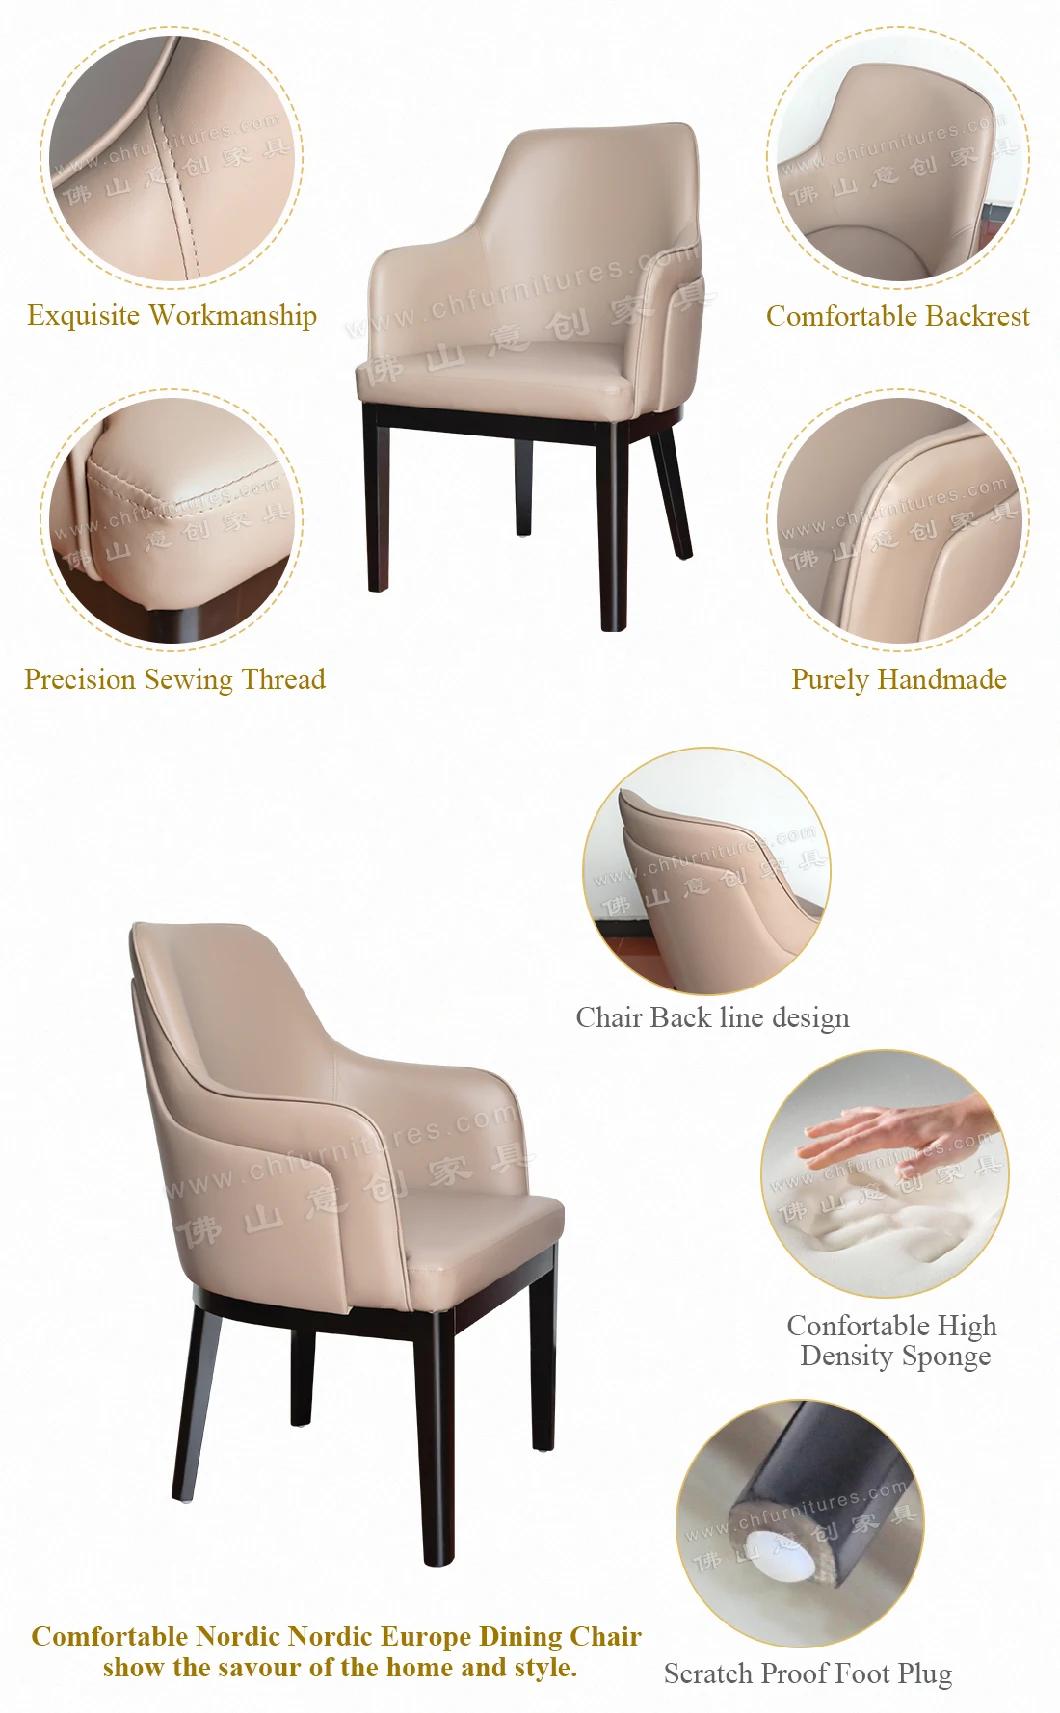 Hyc-Nu126 Modern Light Luxury New Chinese Leather Chair Combination for The Living Room Hotel Sales Office Negotiation